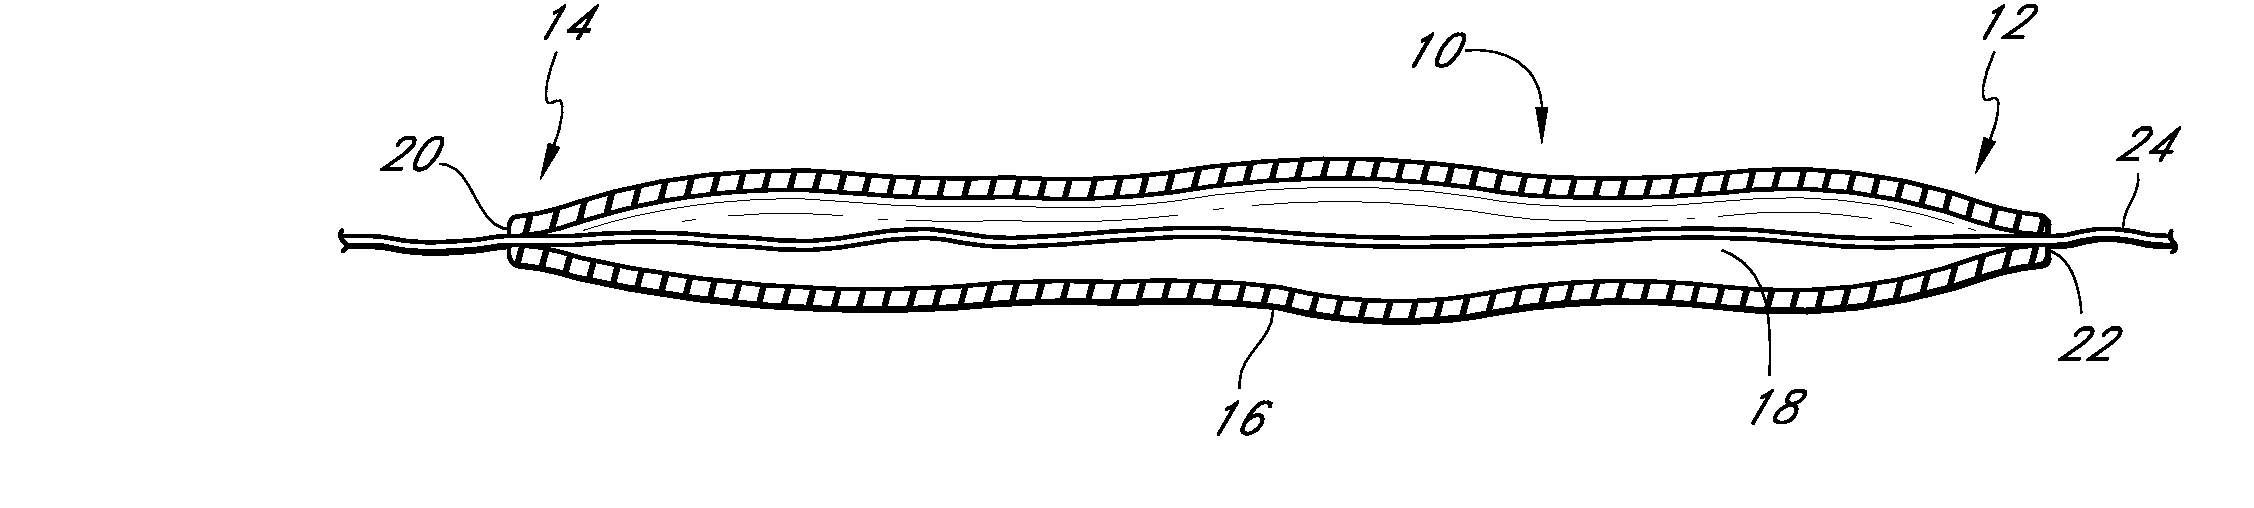 Methods of forming a multilayer tissue implant to create an accordion effect on the outer layer